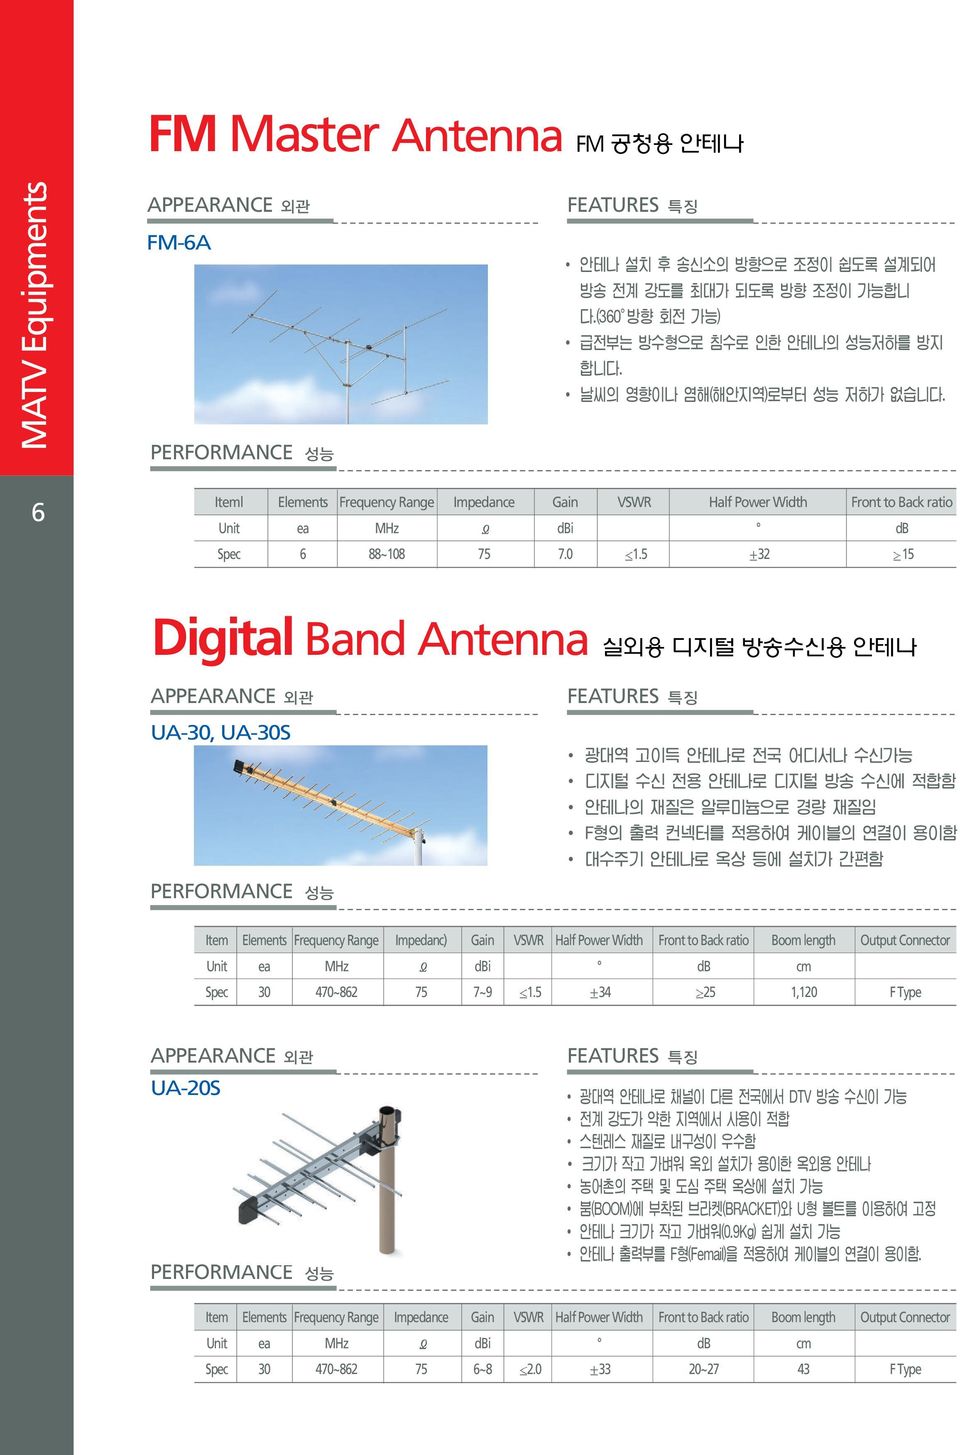 5 32 15 Digital Band Antenna APPEARANCE UA-30, UA-30S FEATURES PERFORMANCE Item Elements Frequency Range Impedanc) Gain VSWR Half Power Width Front to Back ratio Boom